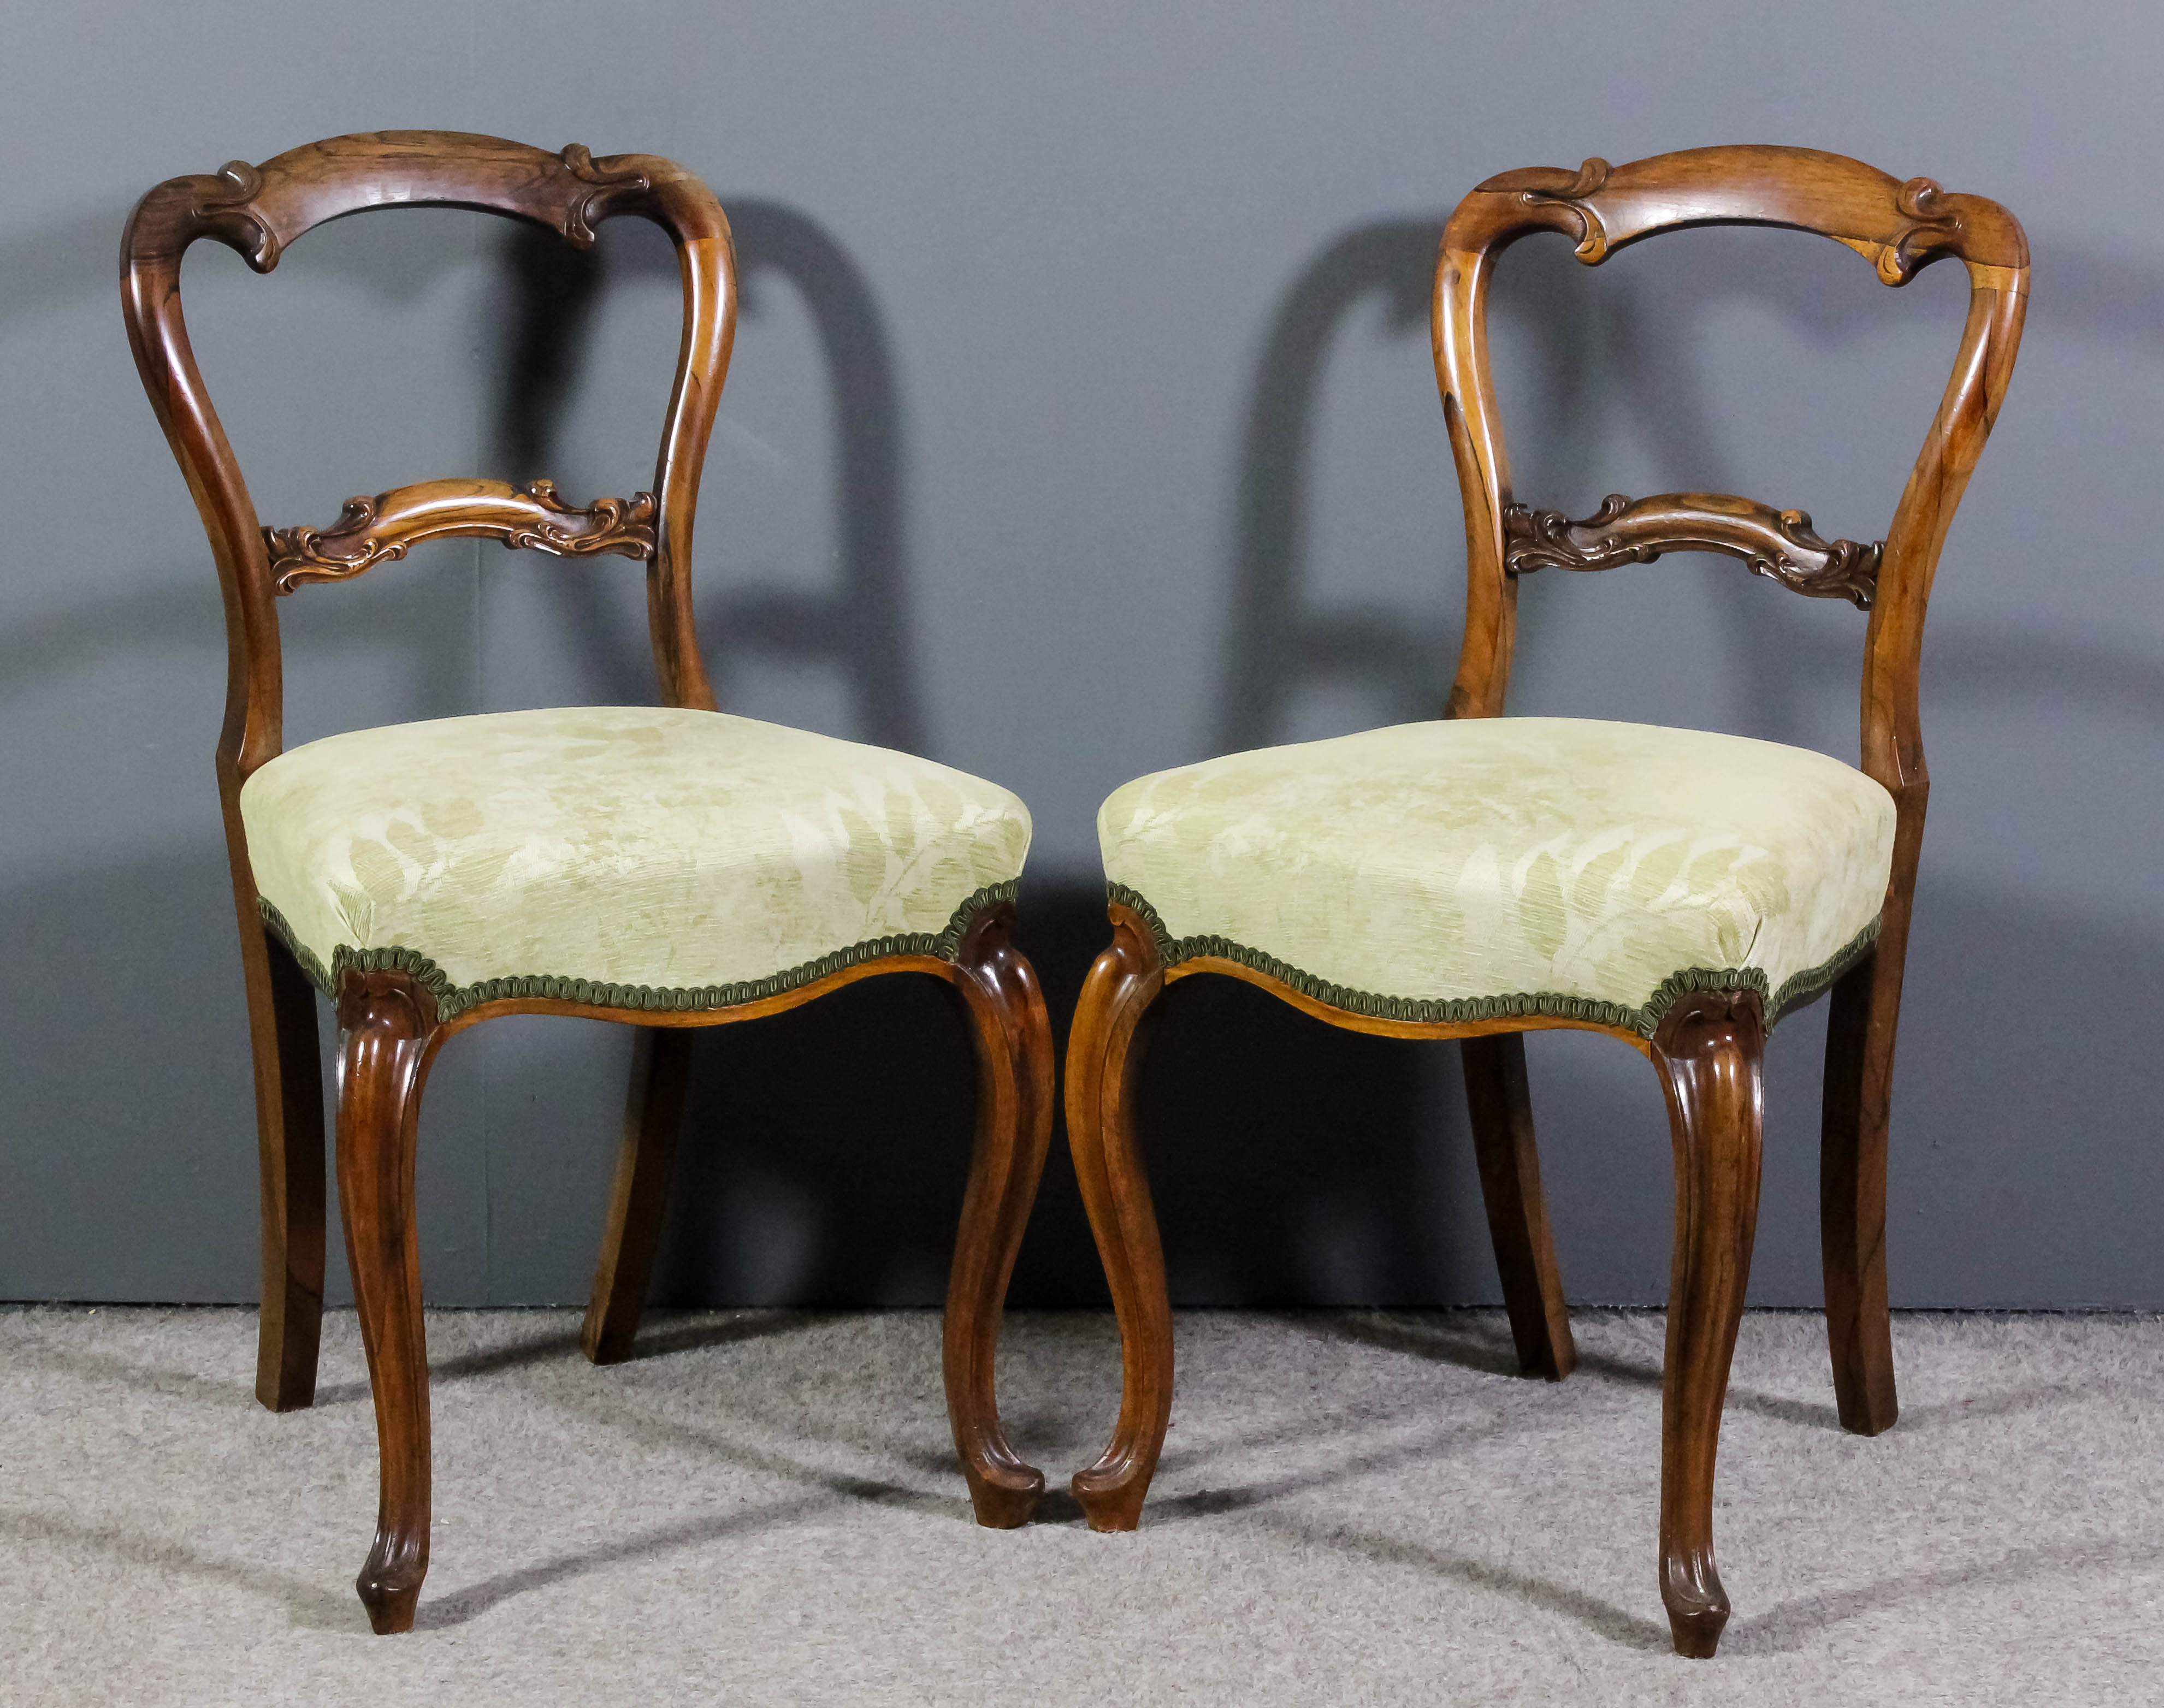 A pair of Victorian rosewood occasional chairs, the shaped backs with scroll carved crest rails